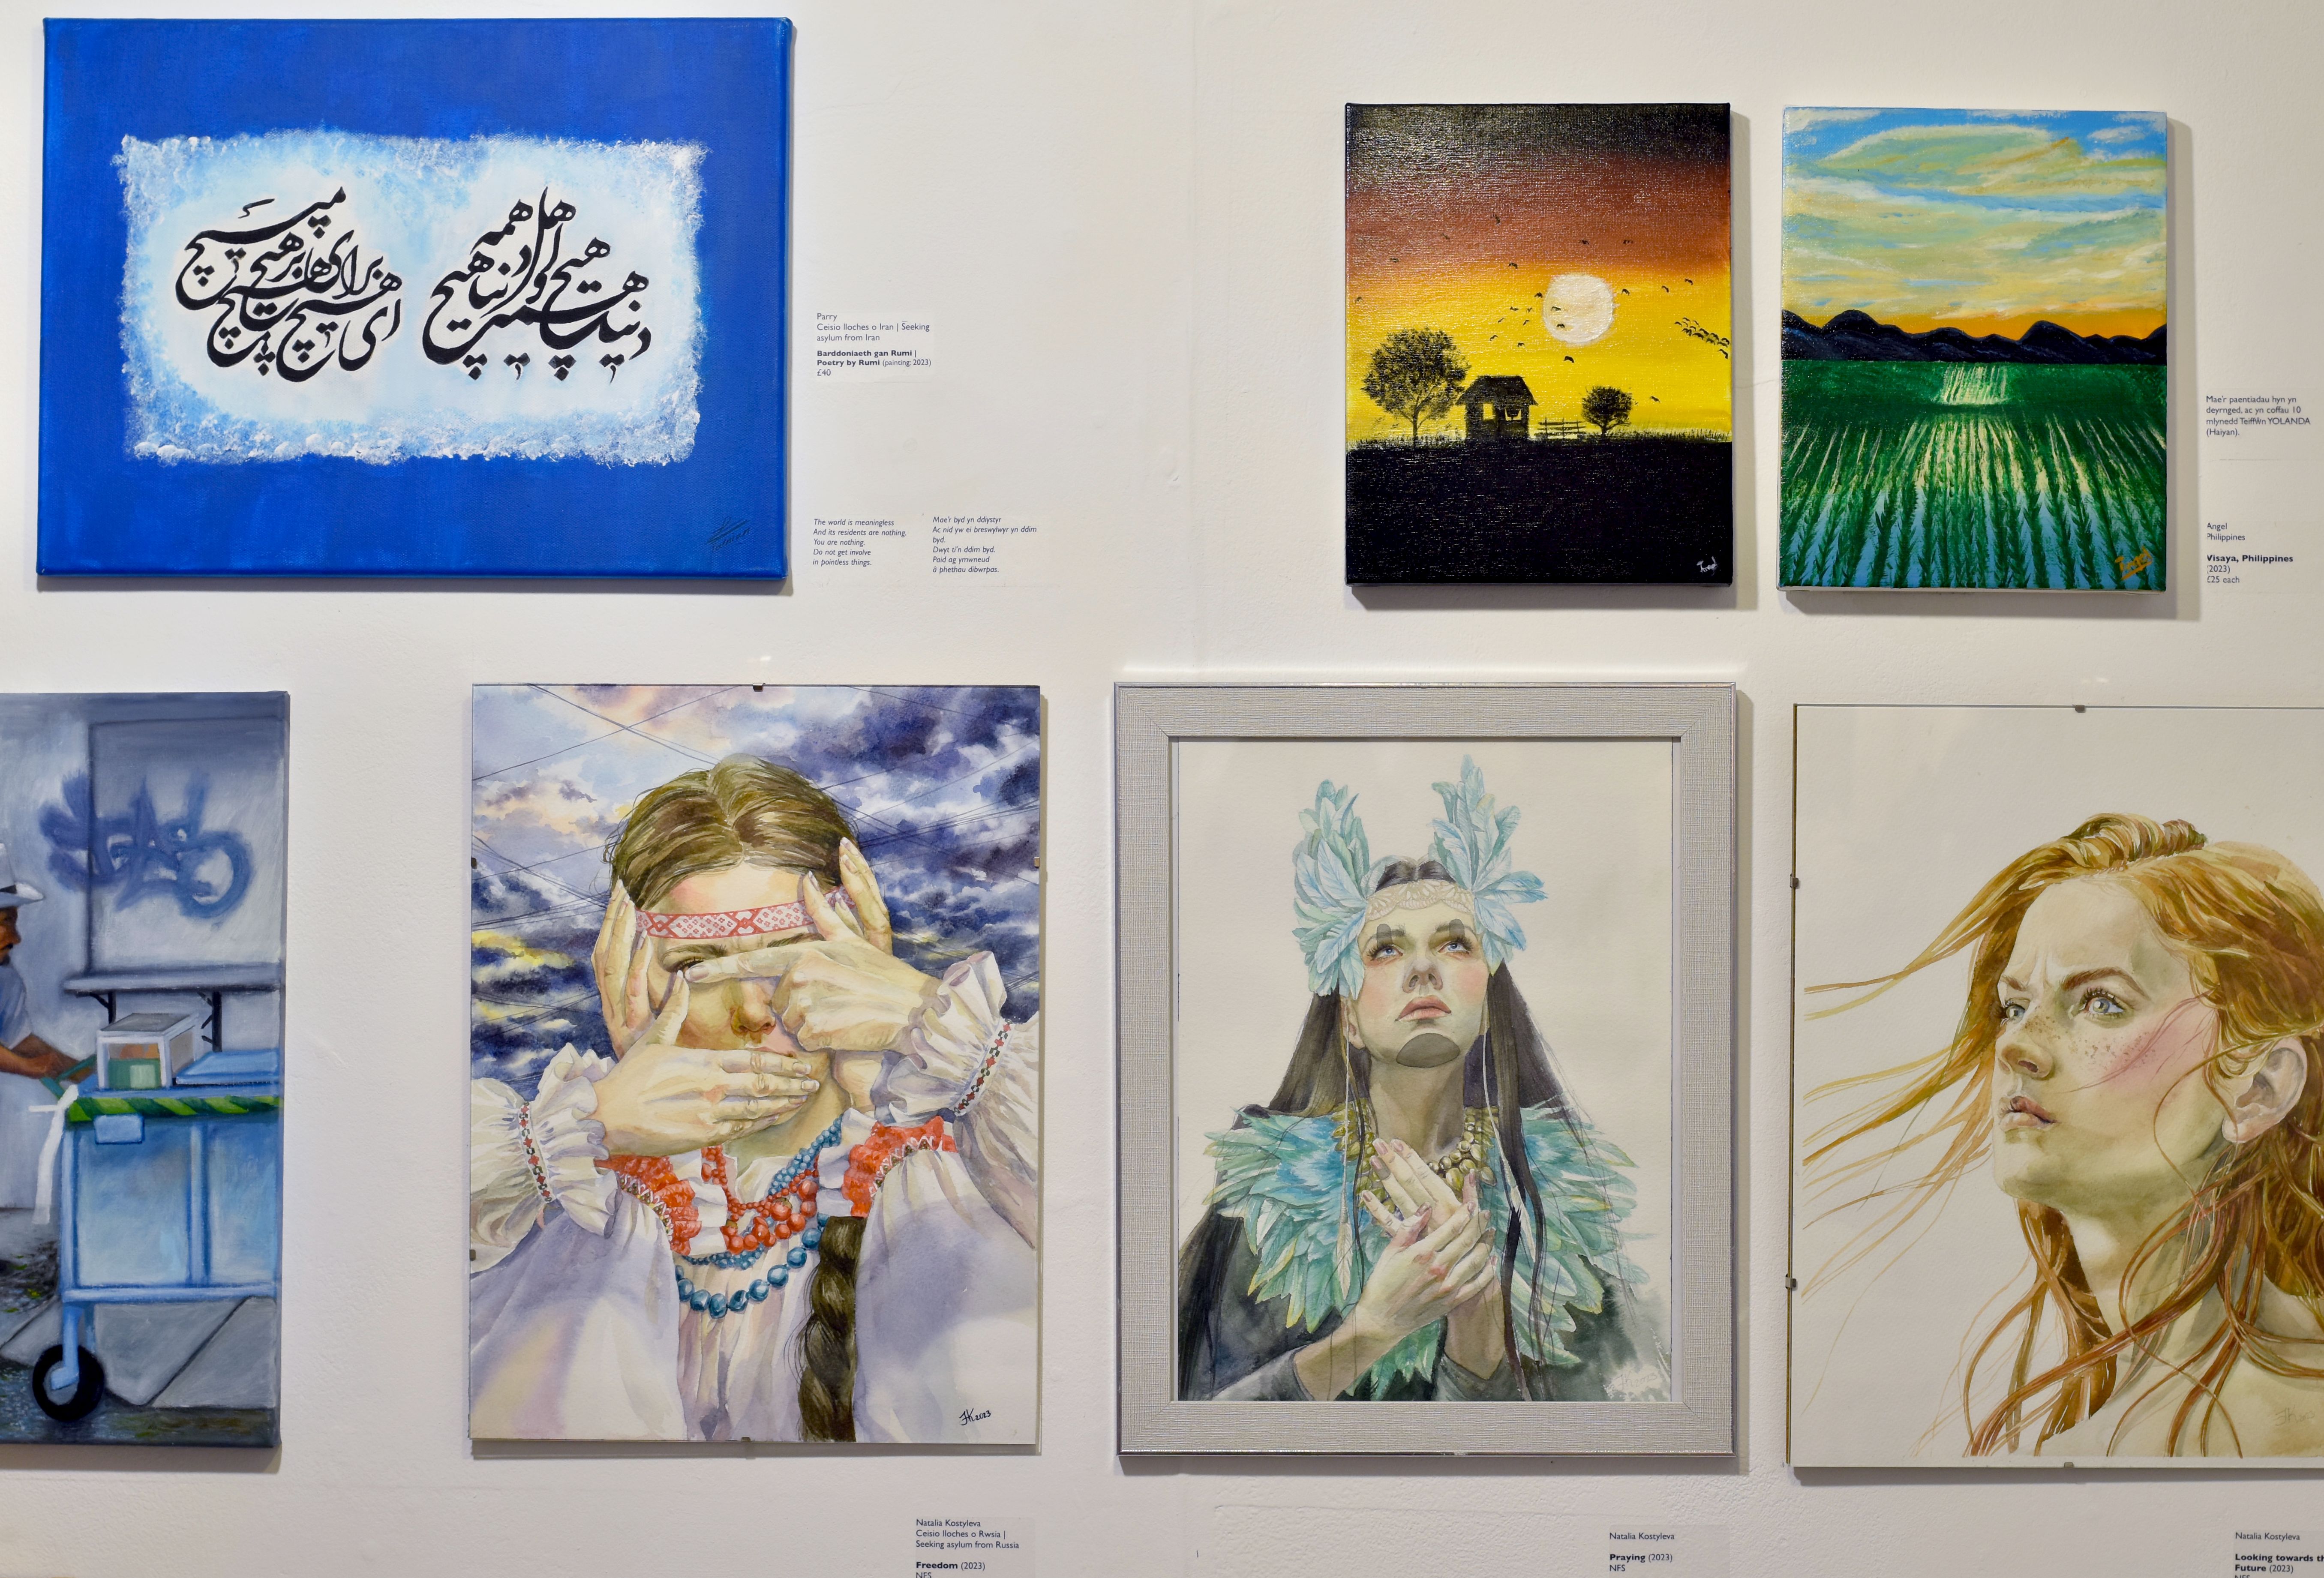 Install images of artworks by local artists seeking asylum in Swansea